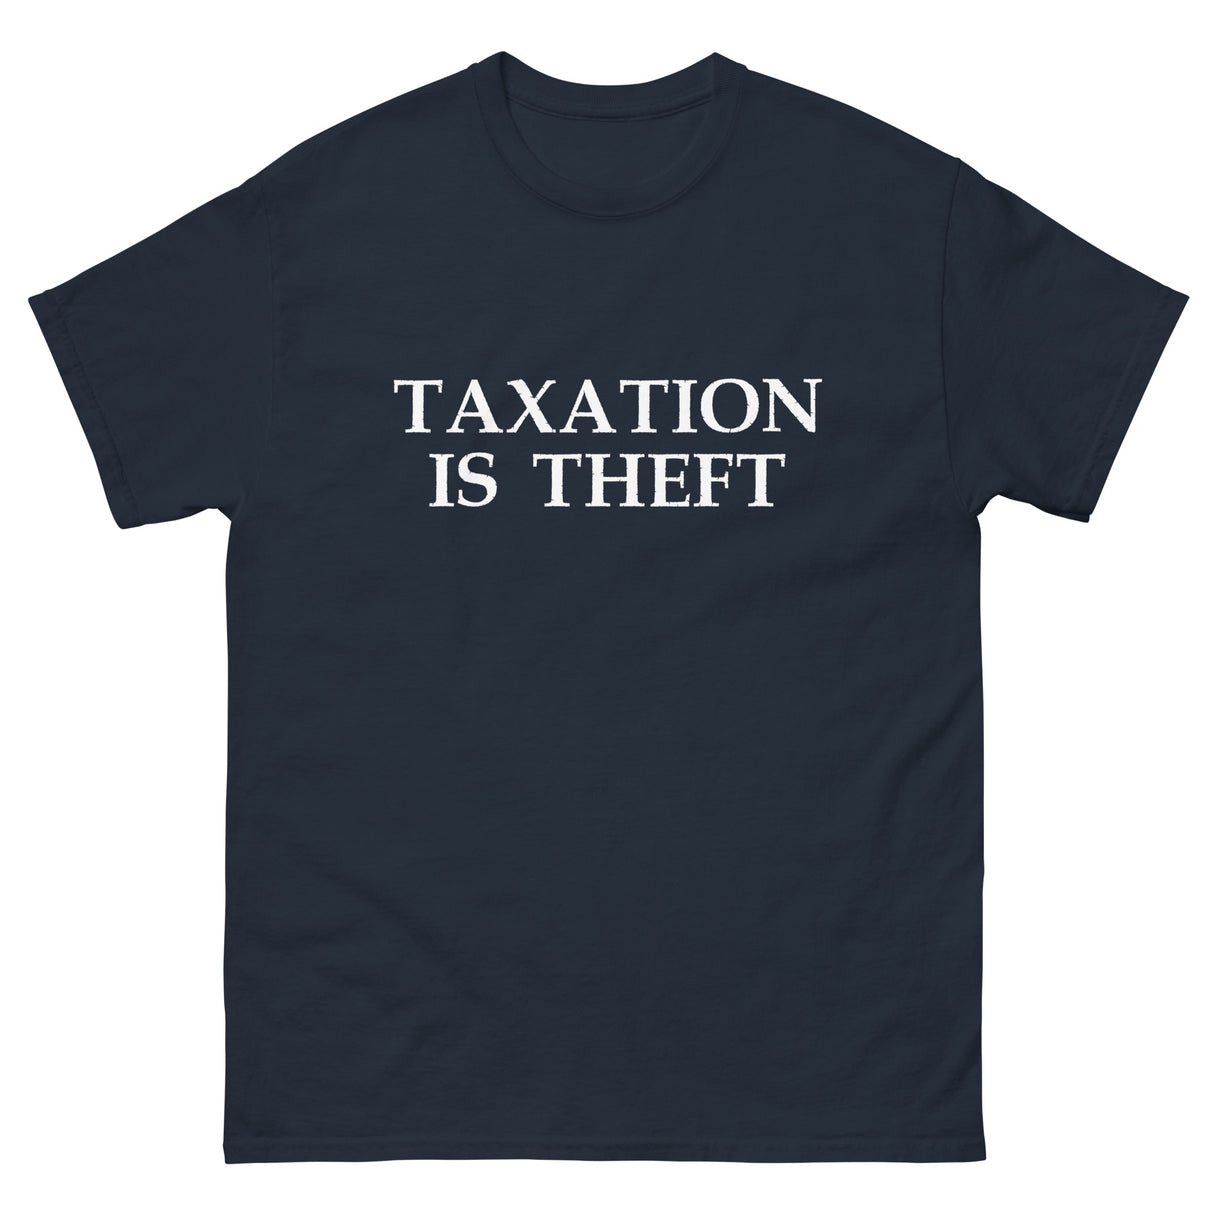 Taxation is Theft Heavy Cotton Shirt - Libertarian Country